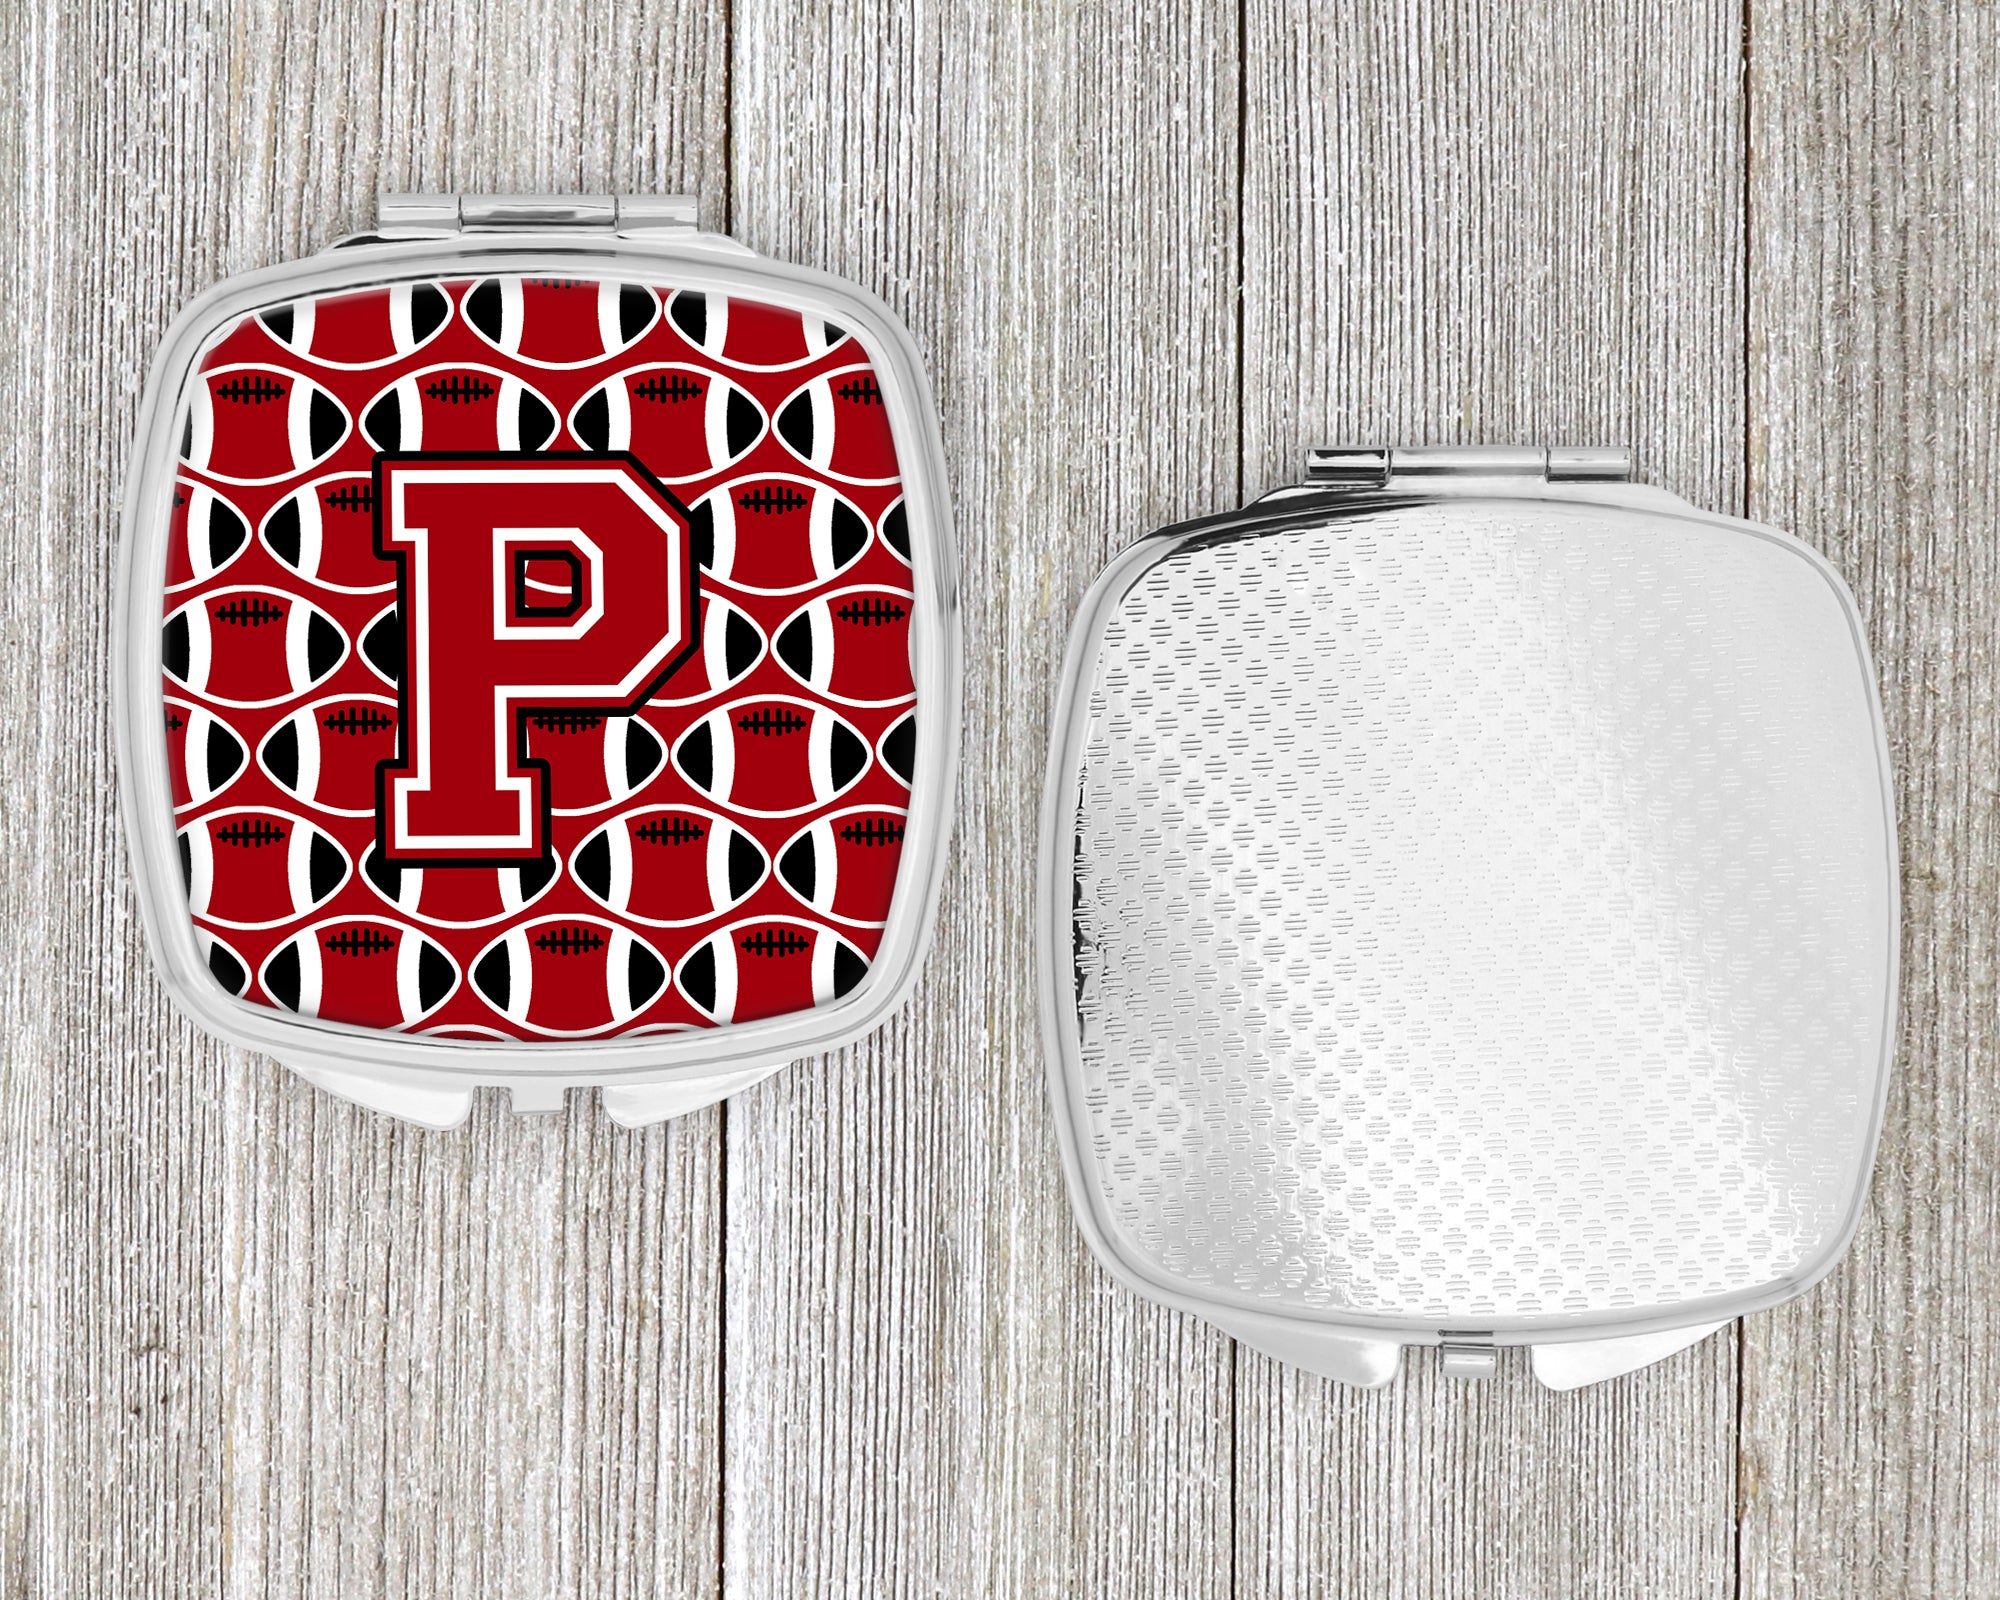 Letter P Football Red, Black and White Compact Mirror CJ1073-PSCM